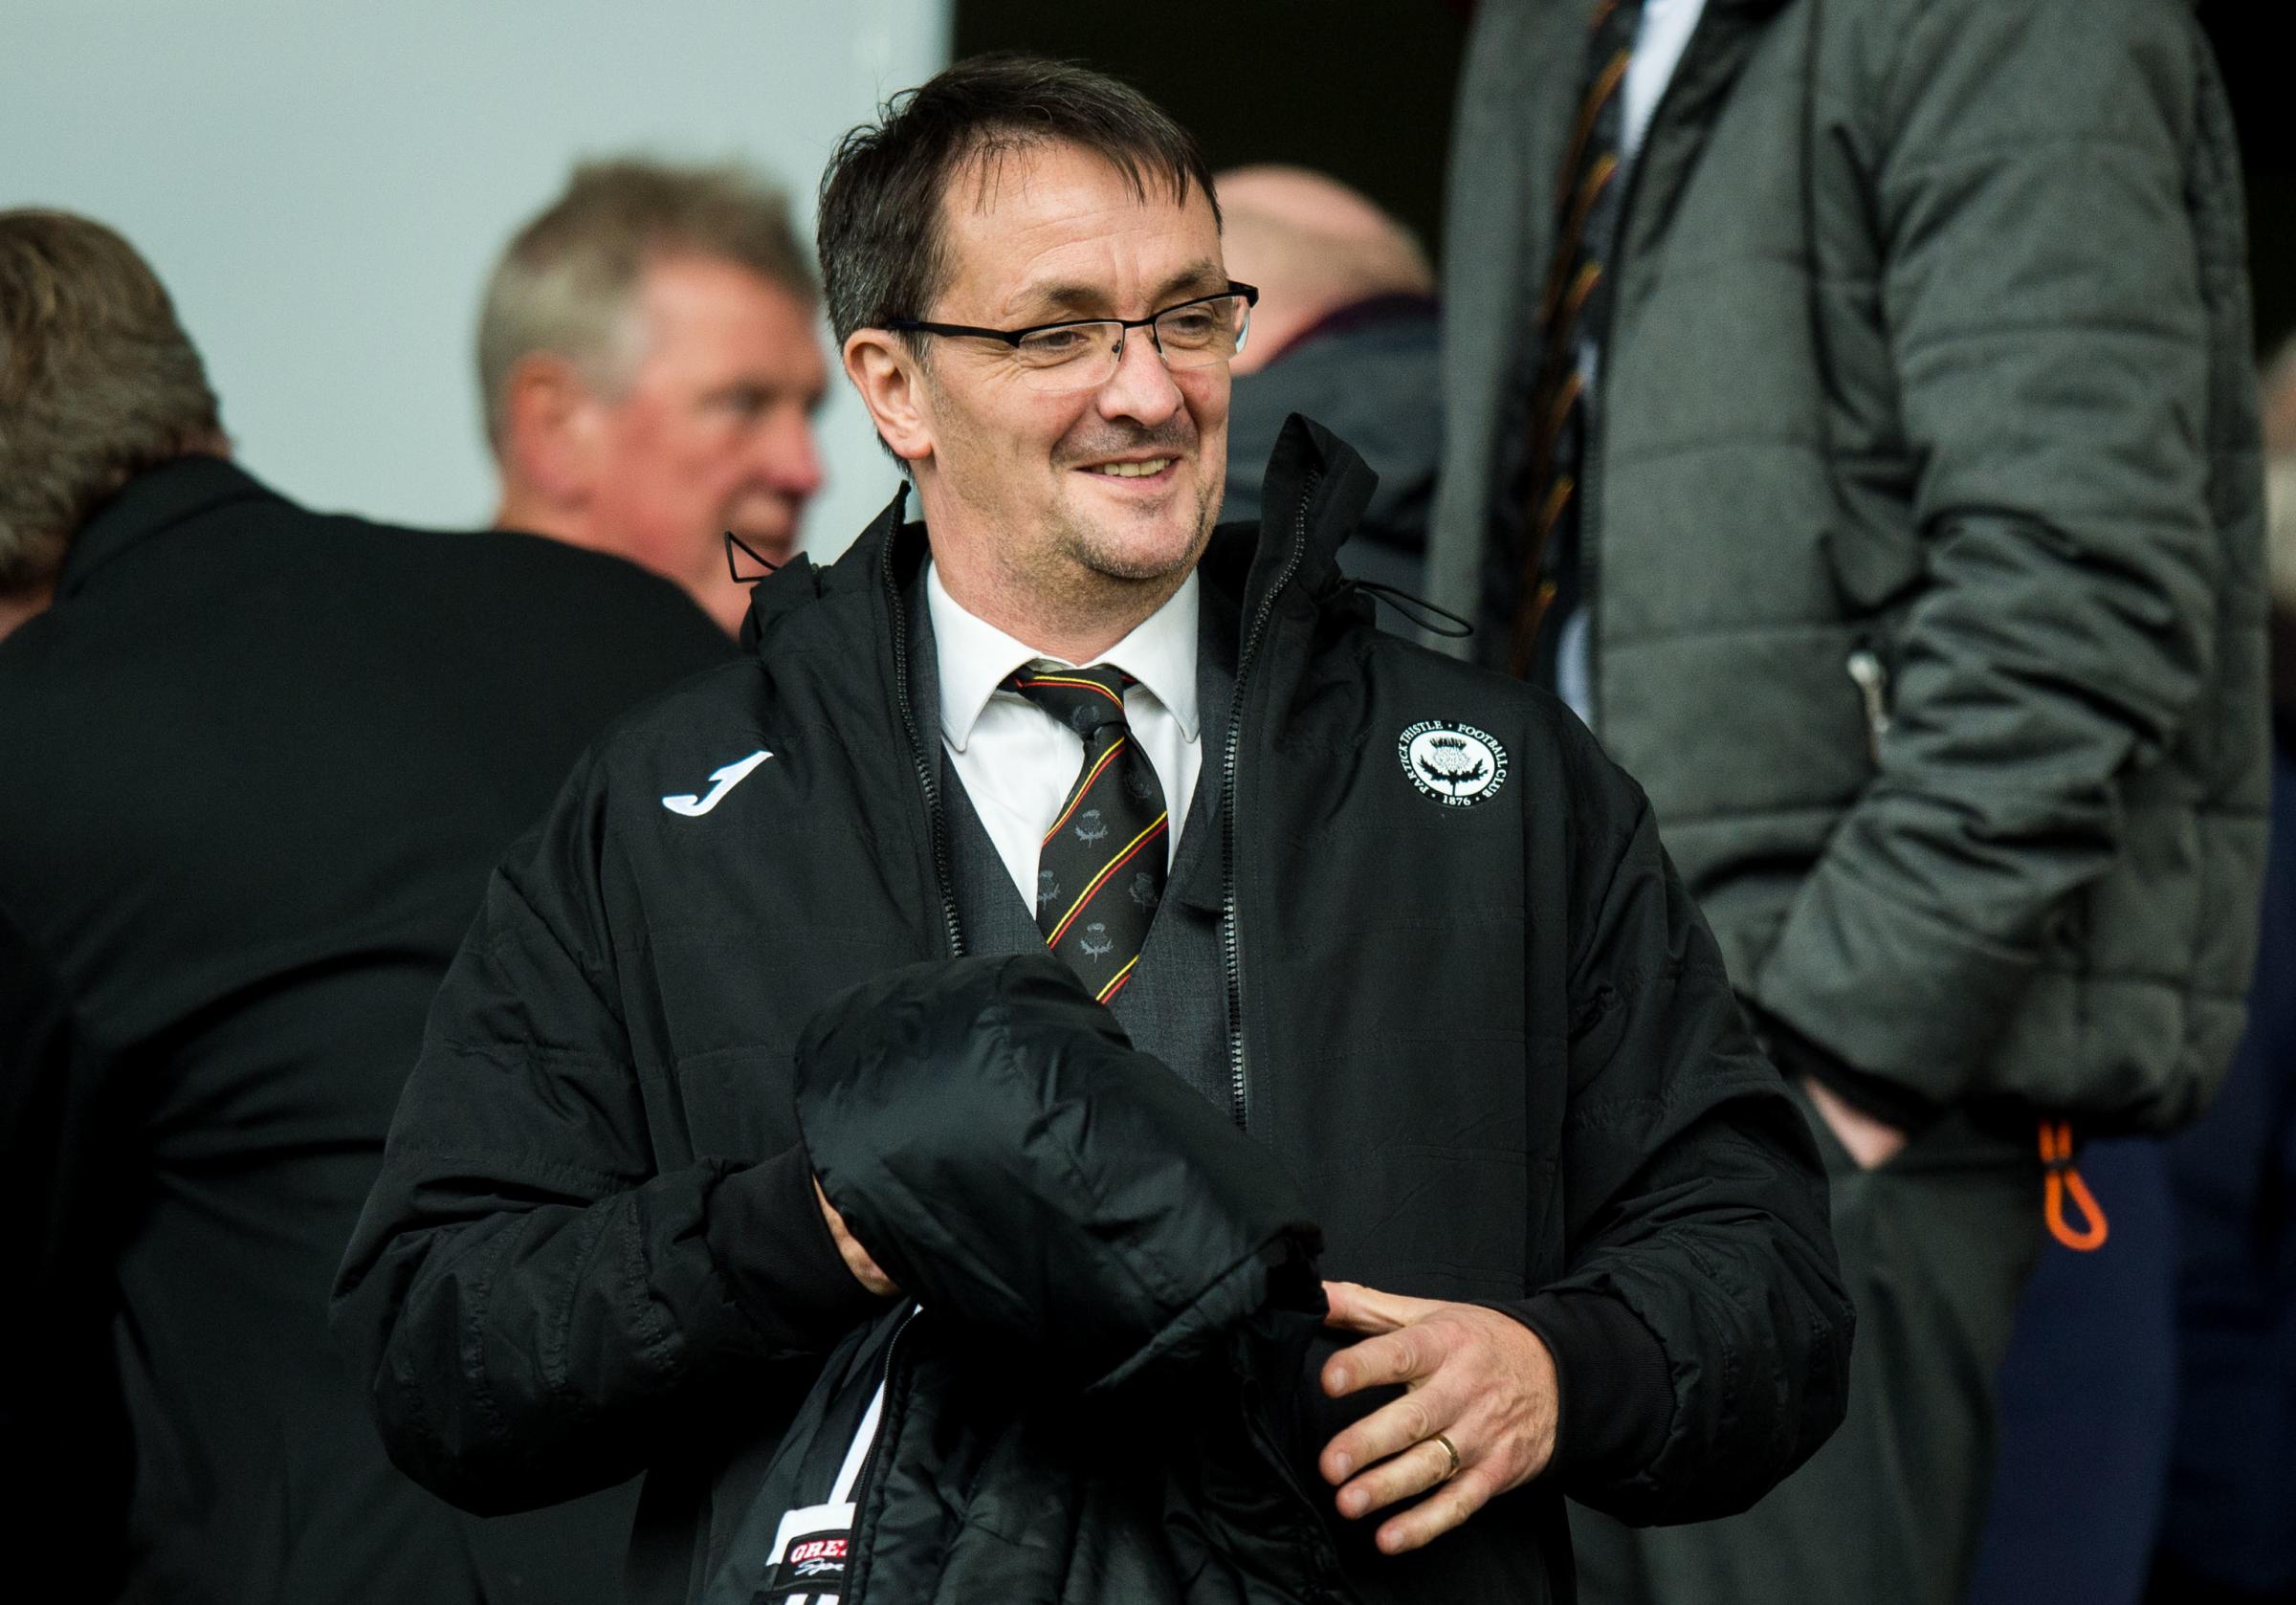 Gerry Britton: Scrapping season would cost Partick Thistle £150,000